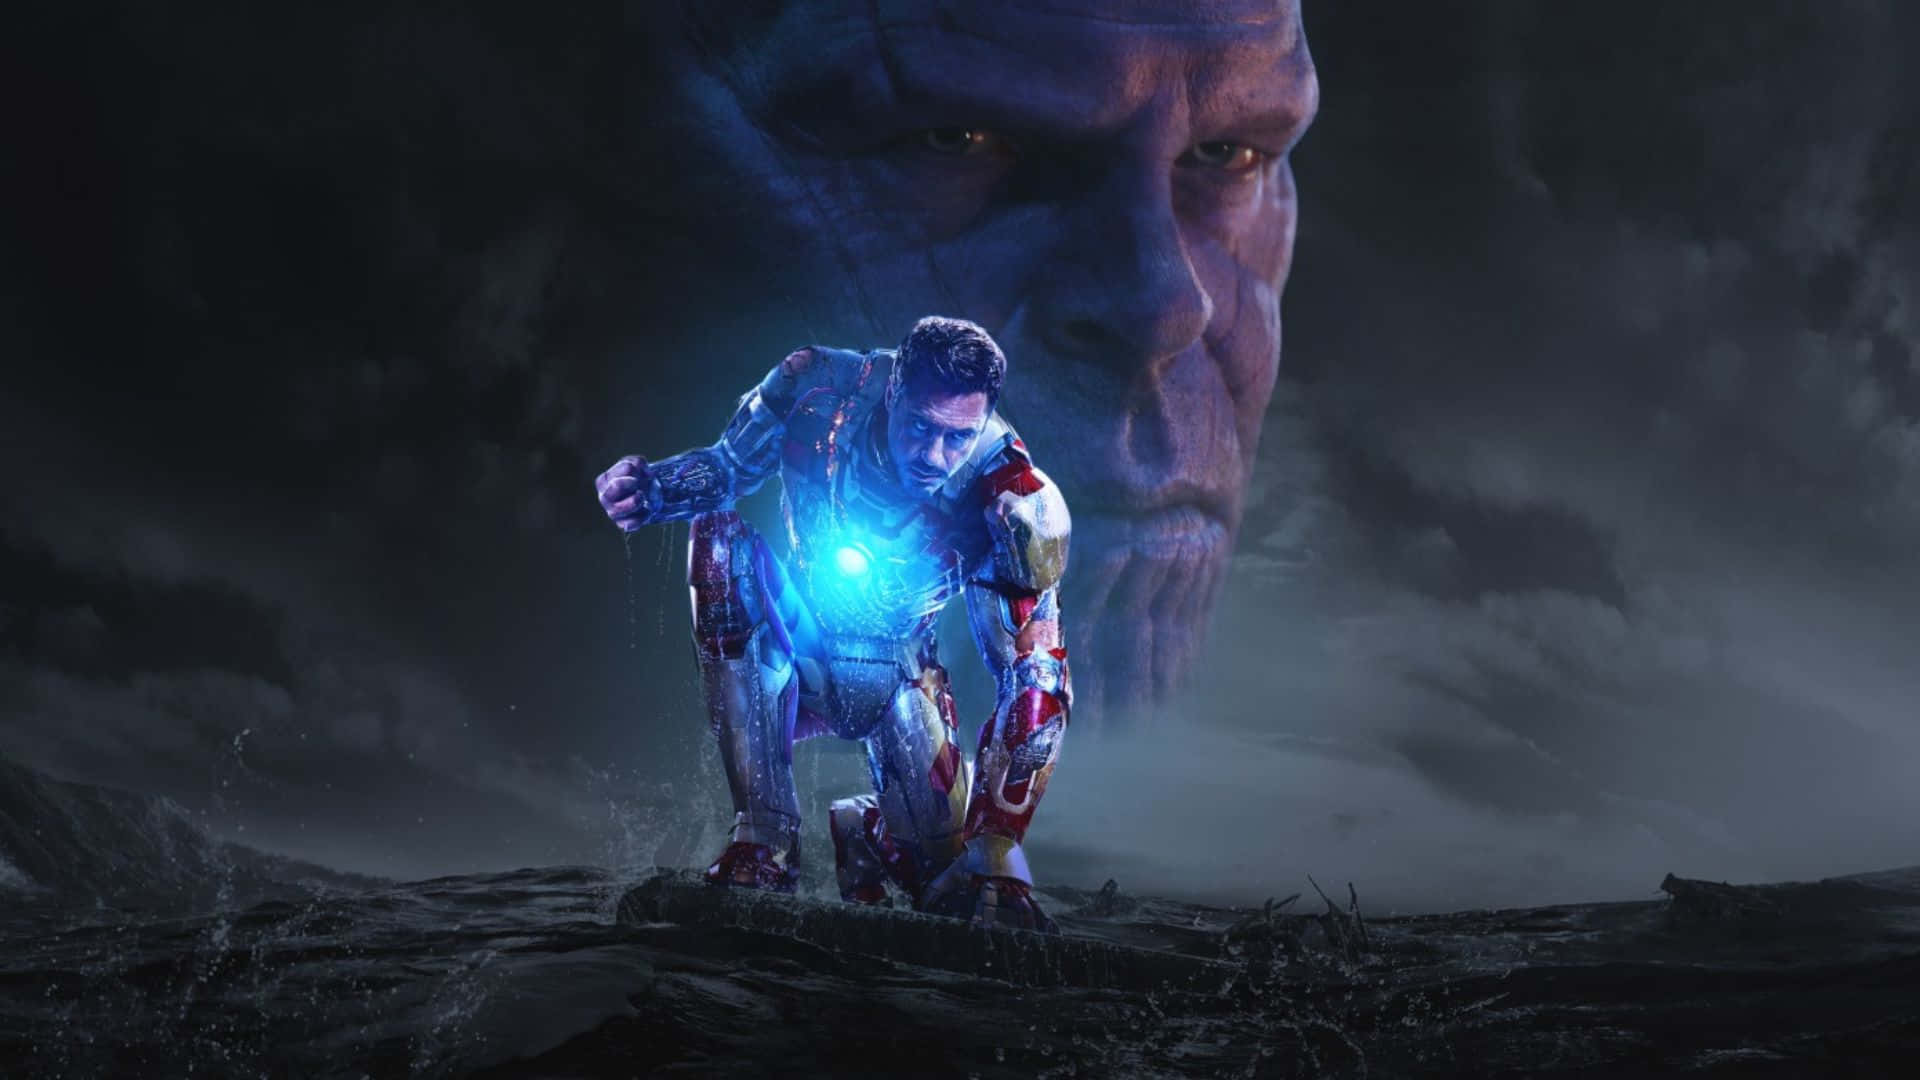 Iron Man vs Thanos, a final showdown that will decide the fate of the universe Wallpaper